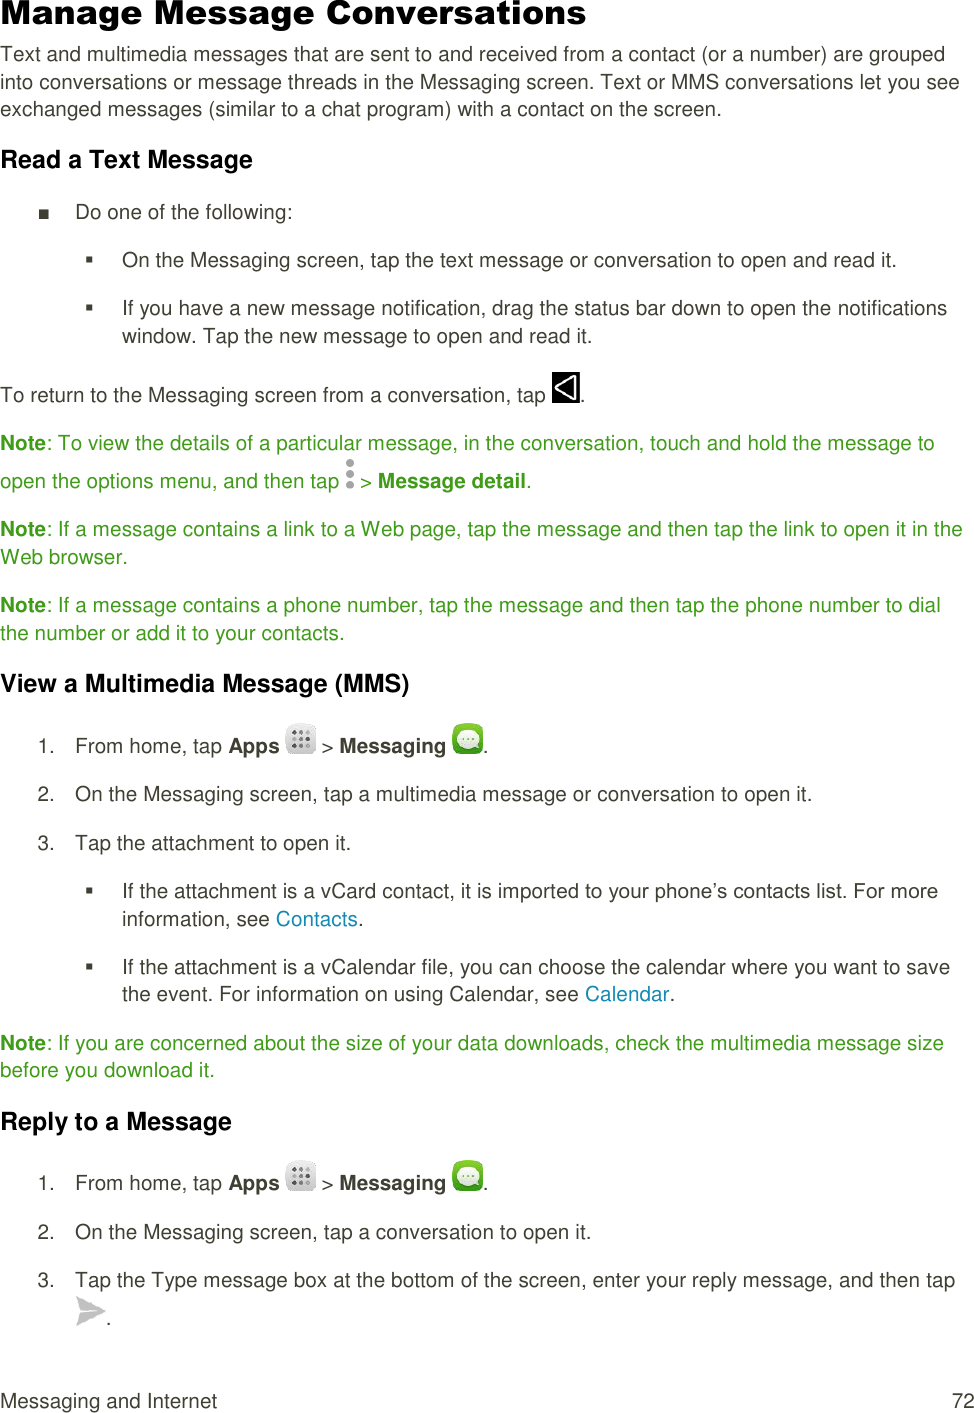 Messaging and Internet  72 Manage Message Conversations Text and multimedia messages that are sent to and received from a contact (or a number) are grouped into conversations or message threads in the Messaging screen. Text or MMS conversations let you see exchanged messages (similar to a chat program) with a contact on the screen. Read a Text Message ■  Do one of the following:   On the Messaging screen, tap the text message or conversation to open and read it.   If you have a new message notification, drag the status bar down to open the notifications window. Tap the new message to open and read it. To return to the Messaging screen from a conversation, tap  . Note: To view the details of a particular message, in the conversation, touch and hold the message to open the options menu, and then tap   &gt; Message detail. Note: If a message contains a link to a Web page, tap the message and then tap the link to open it in the Web browser. Note: If a message contains a phone number, tap the message and then tap the phone number to dial the number or add it to your contacts. View a Multimedia Message (MMS) 1.  From home, tap Apps   &gt; Messaging  . 2.  On the Messaging screen, tap a multimedia message or conversation to open it. 3.  Tap the attachment to open it.    If the attachment is a vCard contact, it is imported to your phone’s contacts list. For more information, see Contacts.    If the attachment is a vCalendar file, you can choose the calendar where you want to save the event. For information on using Calendar, see Calendar. Note: If you are concerned about the size of your data downloads, check the multimedia message size before you download it. Reply to a Message 1.  From home, tap Apps   &gt; Messaging  . 2.  On the Messaging screen, tap a conversation to open it. 3.  Tap the Type message box at the bottom of the screen, enter your reply message, and then tap . 